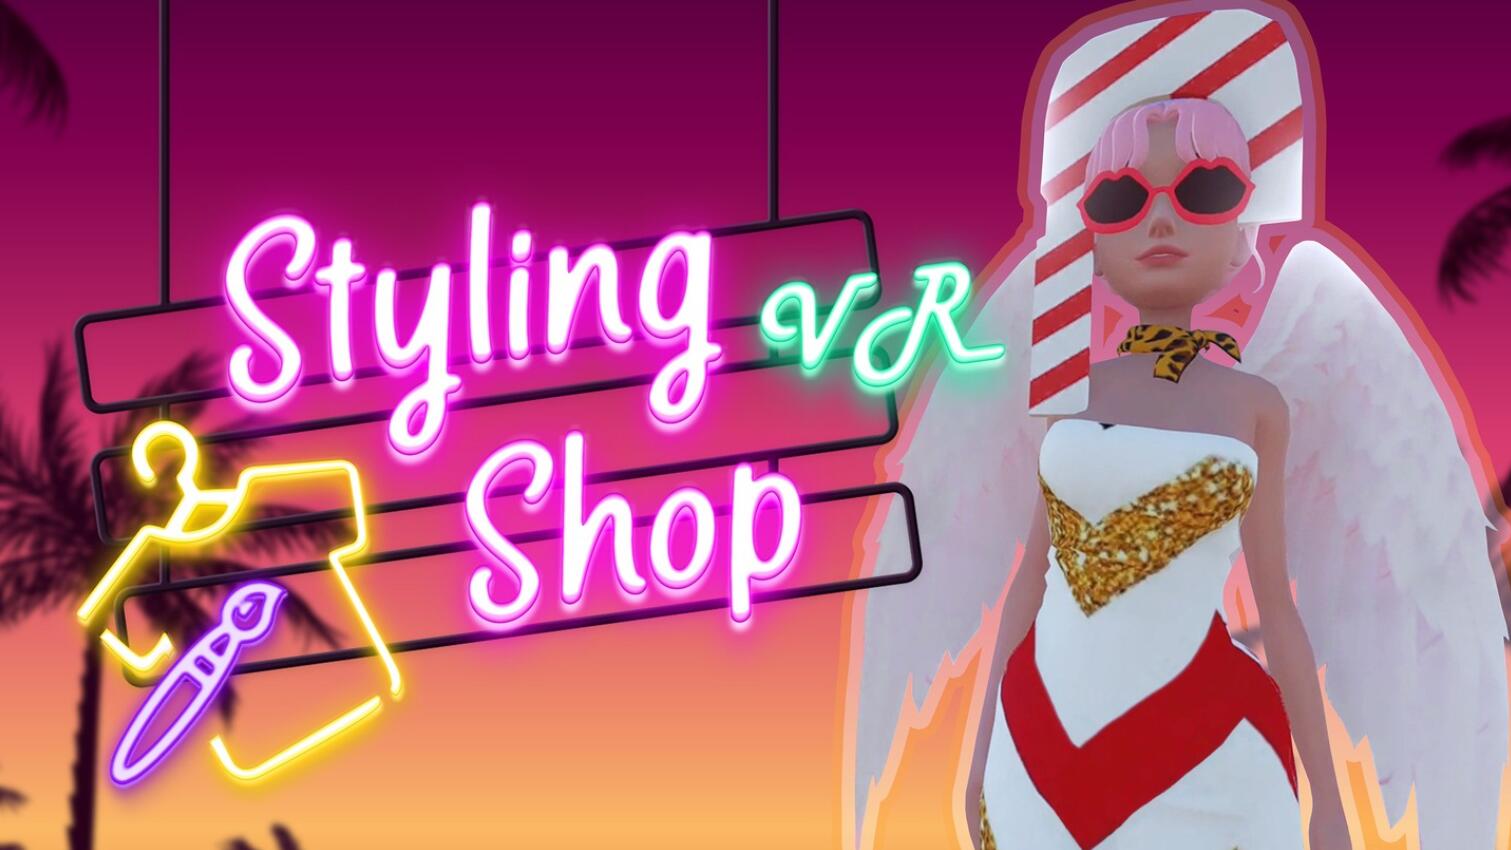 Oculus Quest 游戏《造型店 VR》Stying Shop VR Early Access